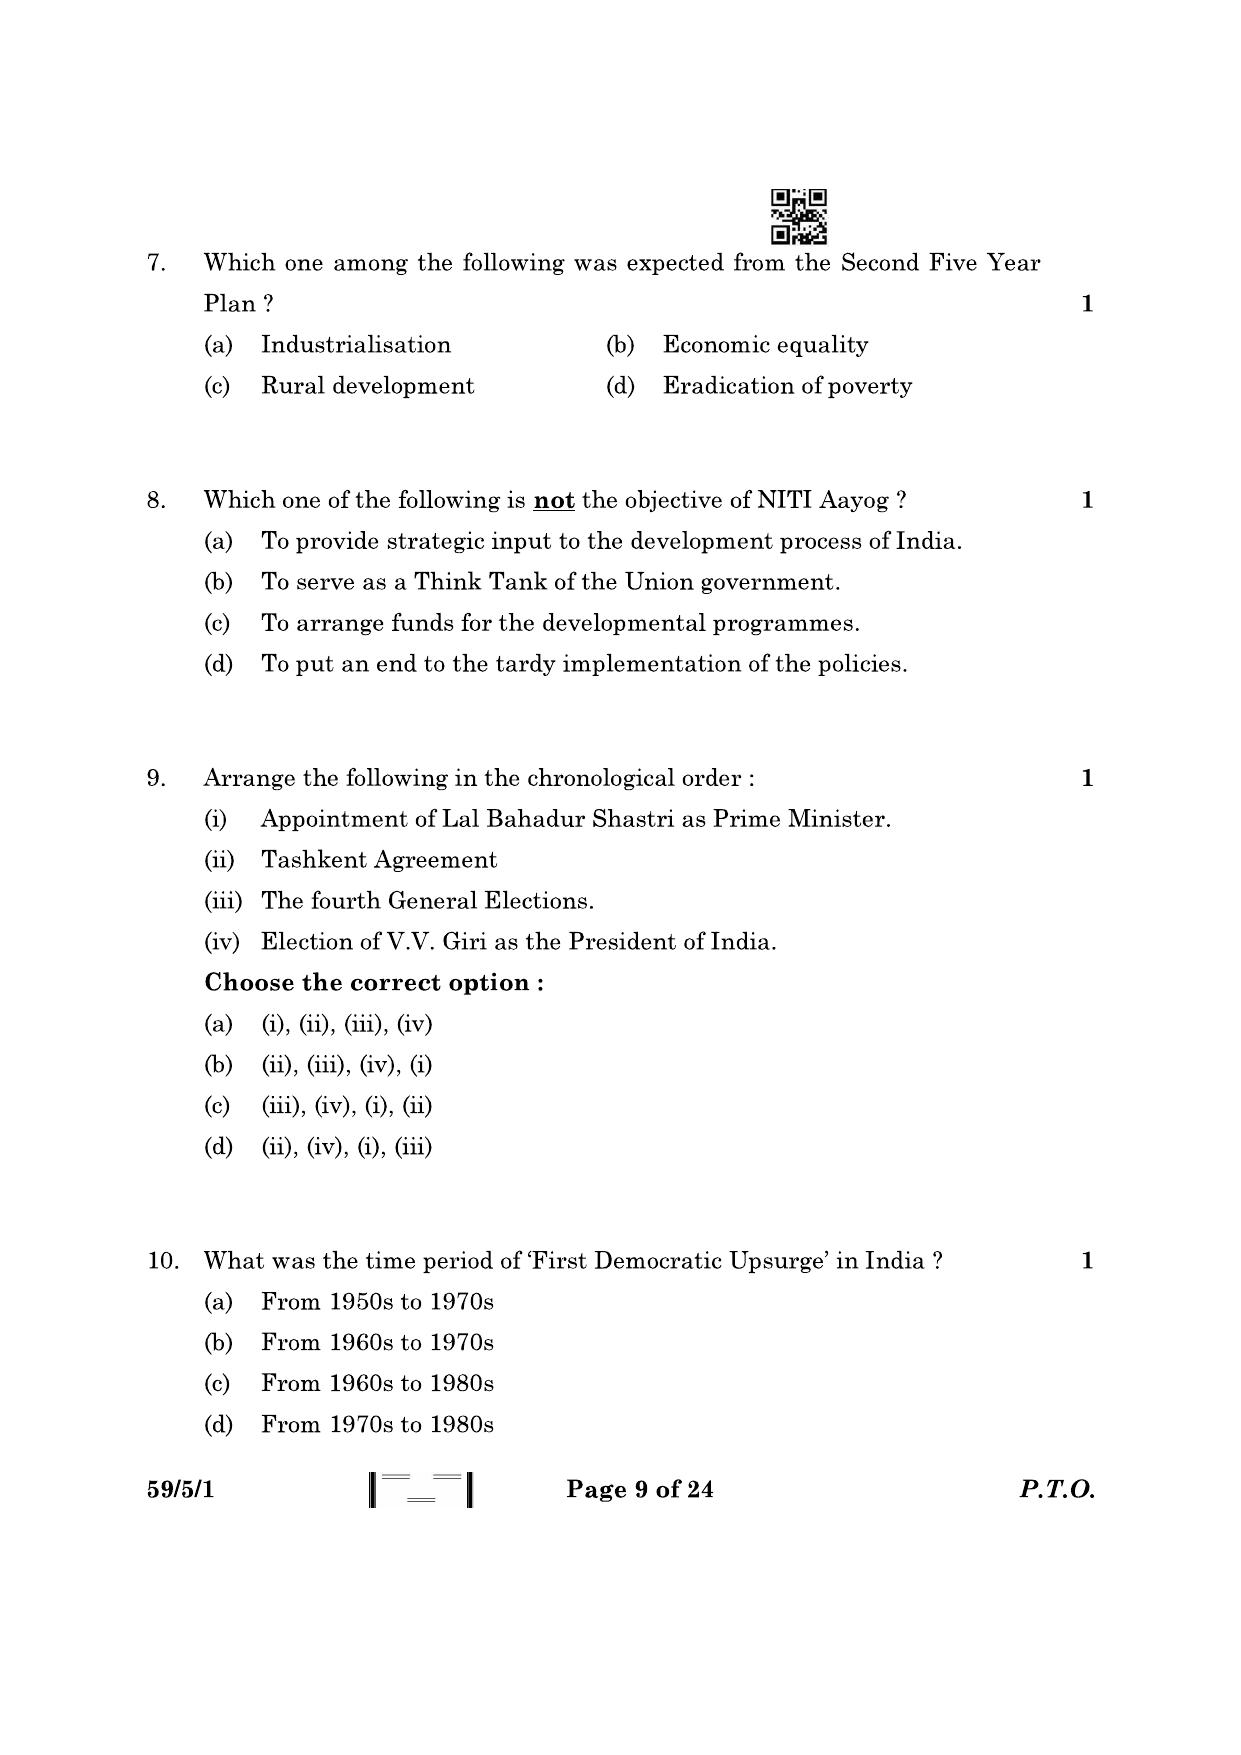 CBSE Class 12 59-5-1 Political Science 2023 Question Paper - Page 9